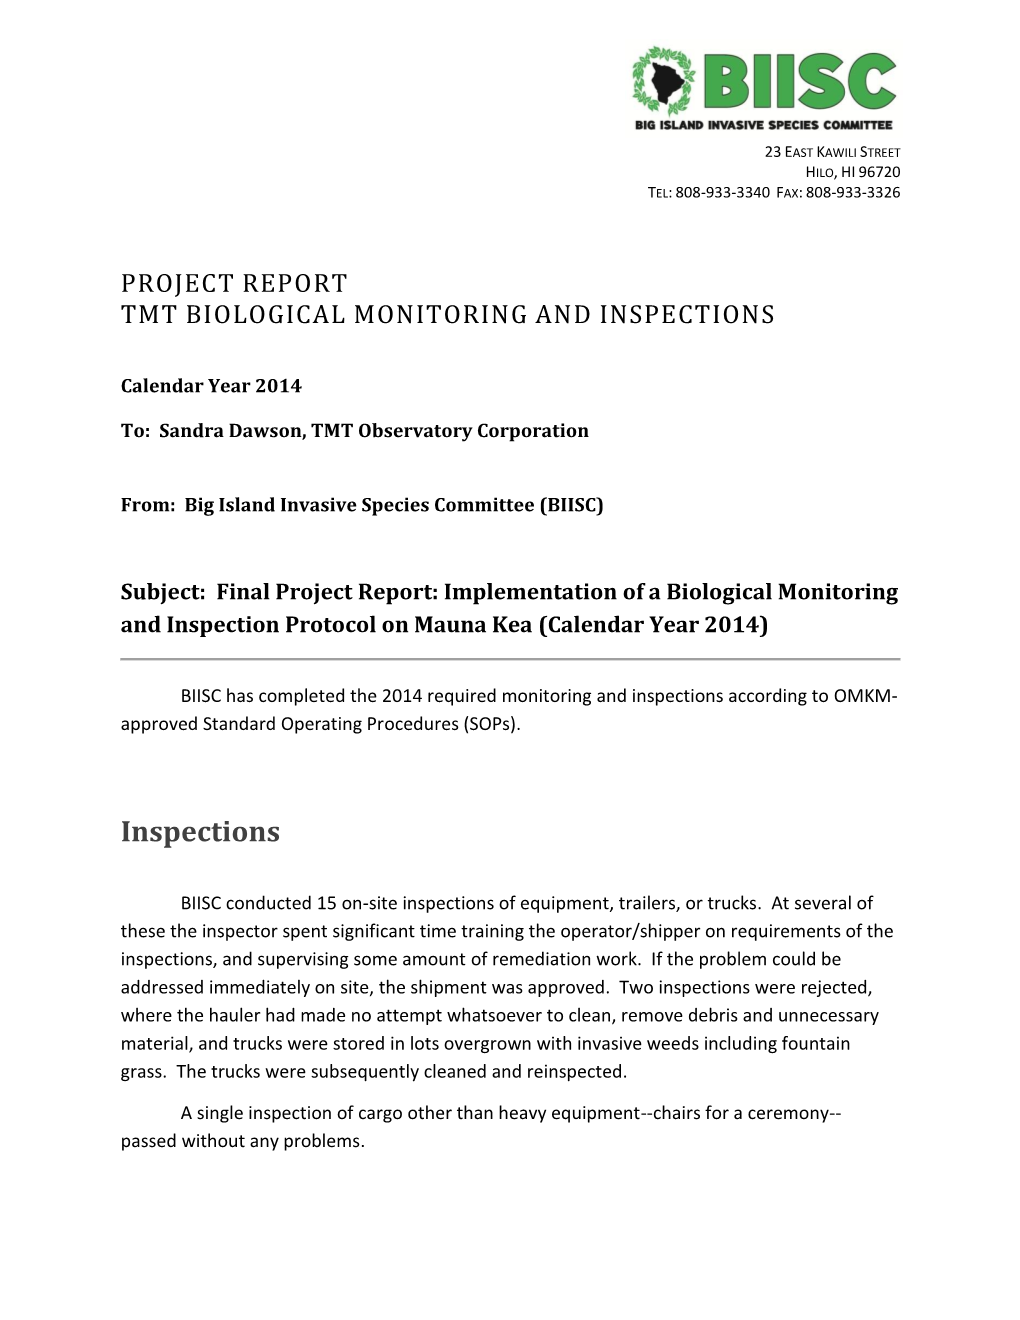 Biological Monitoring and Inspections